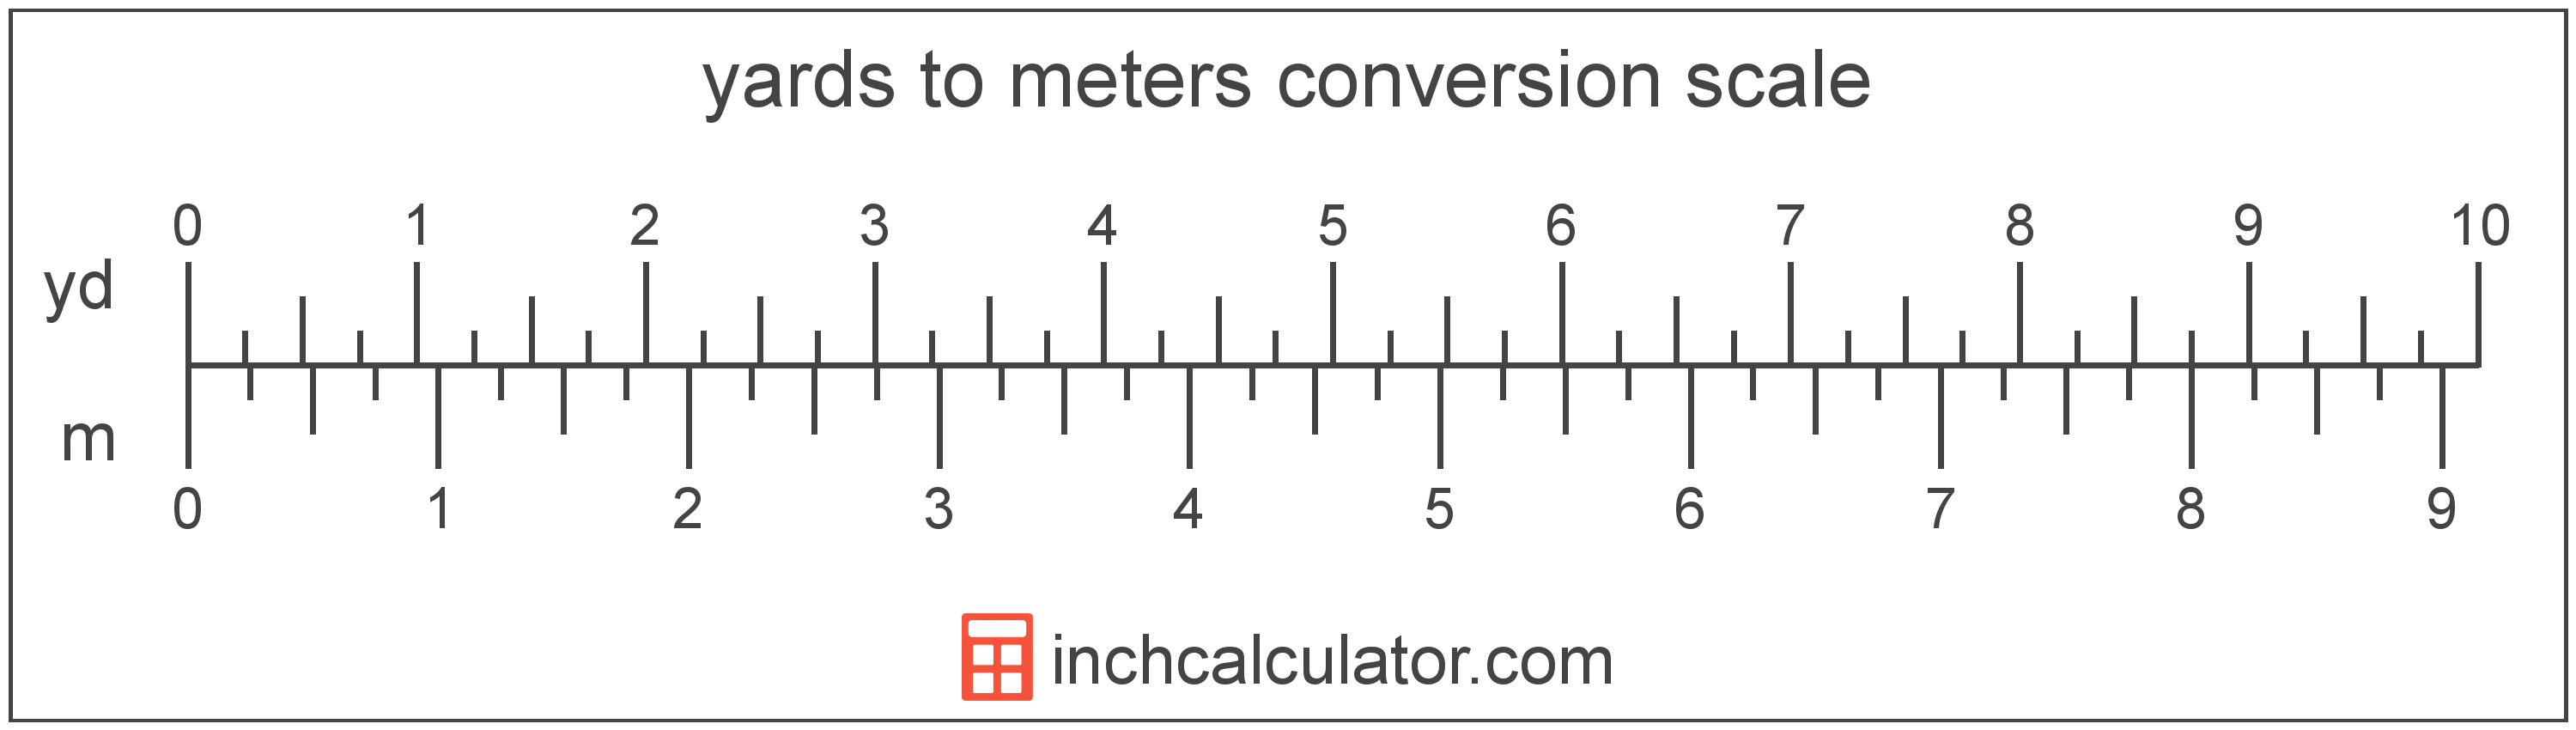 Yard To Meter Conversion Scale 